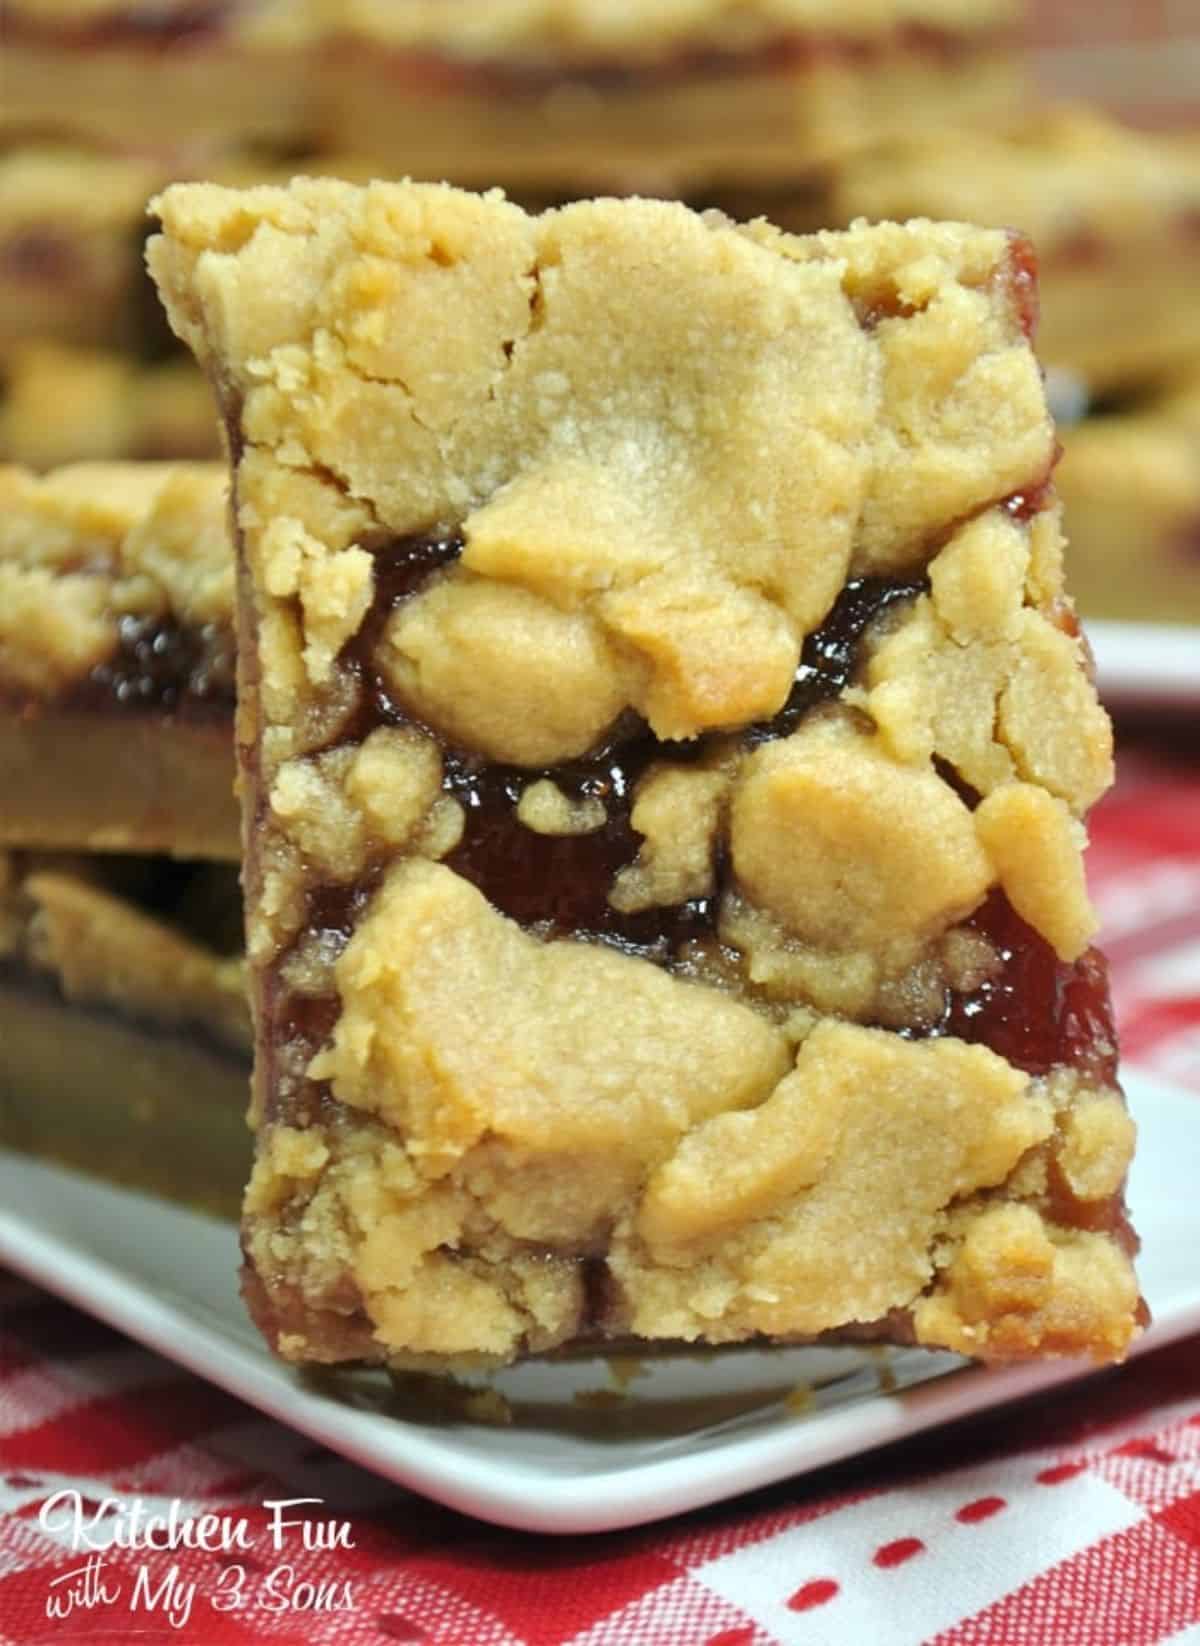 Peanut Butter and Jelly Bars on a tray.